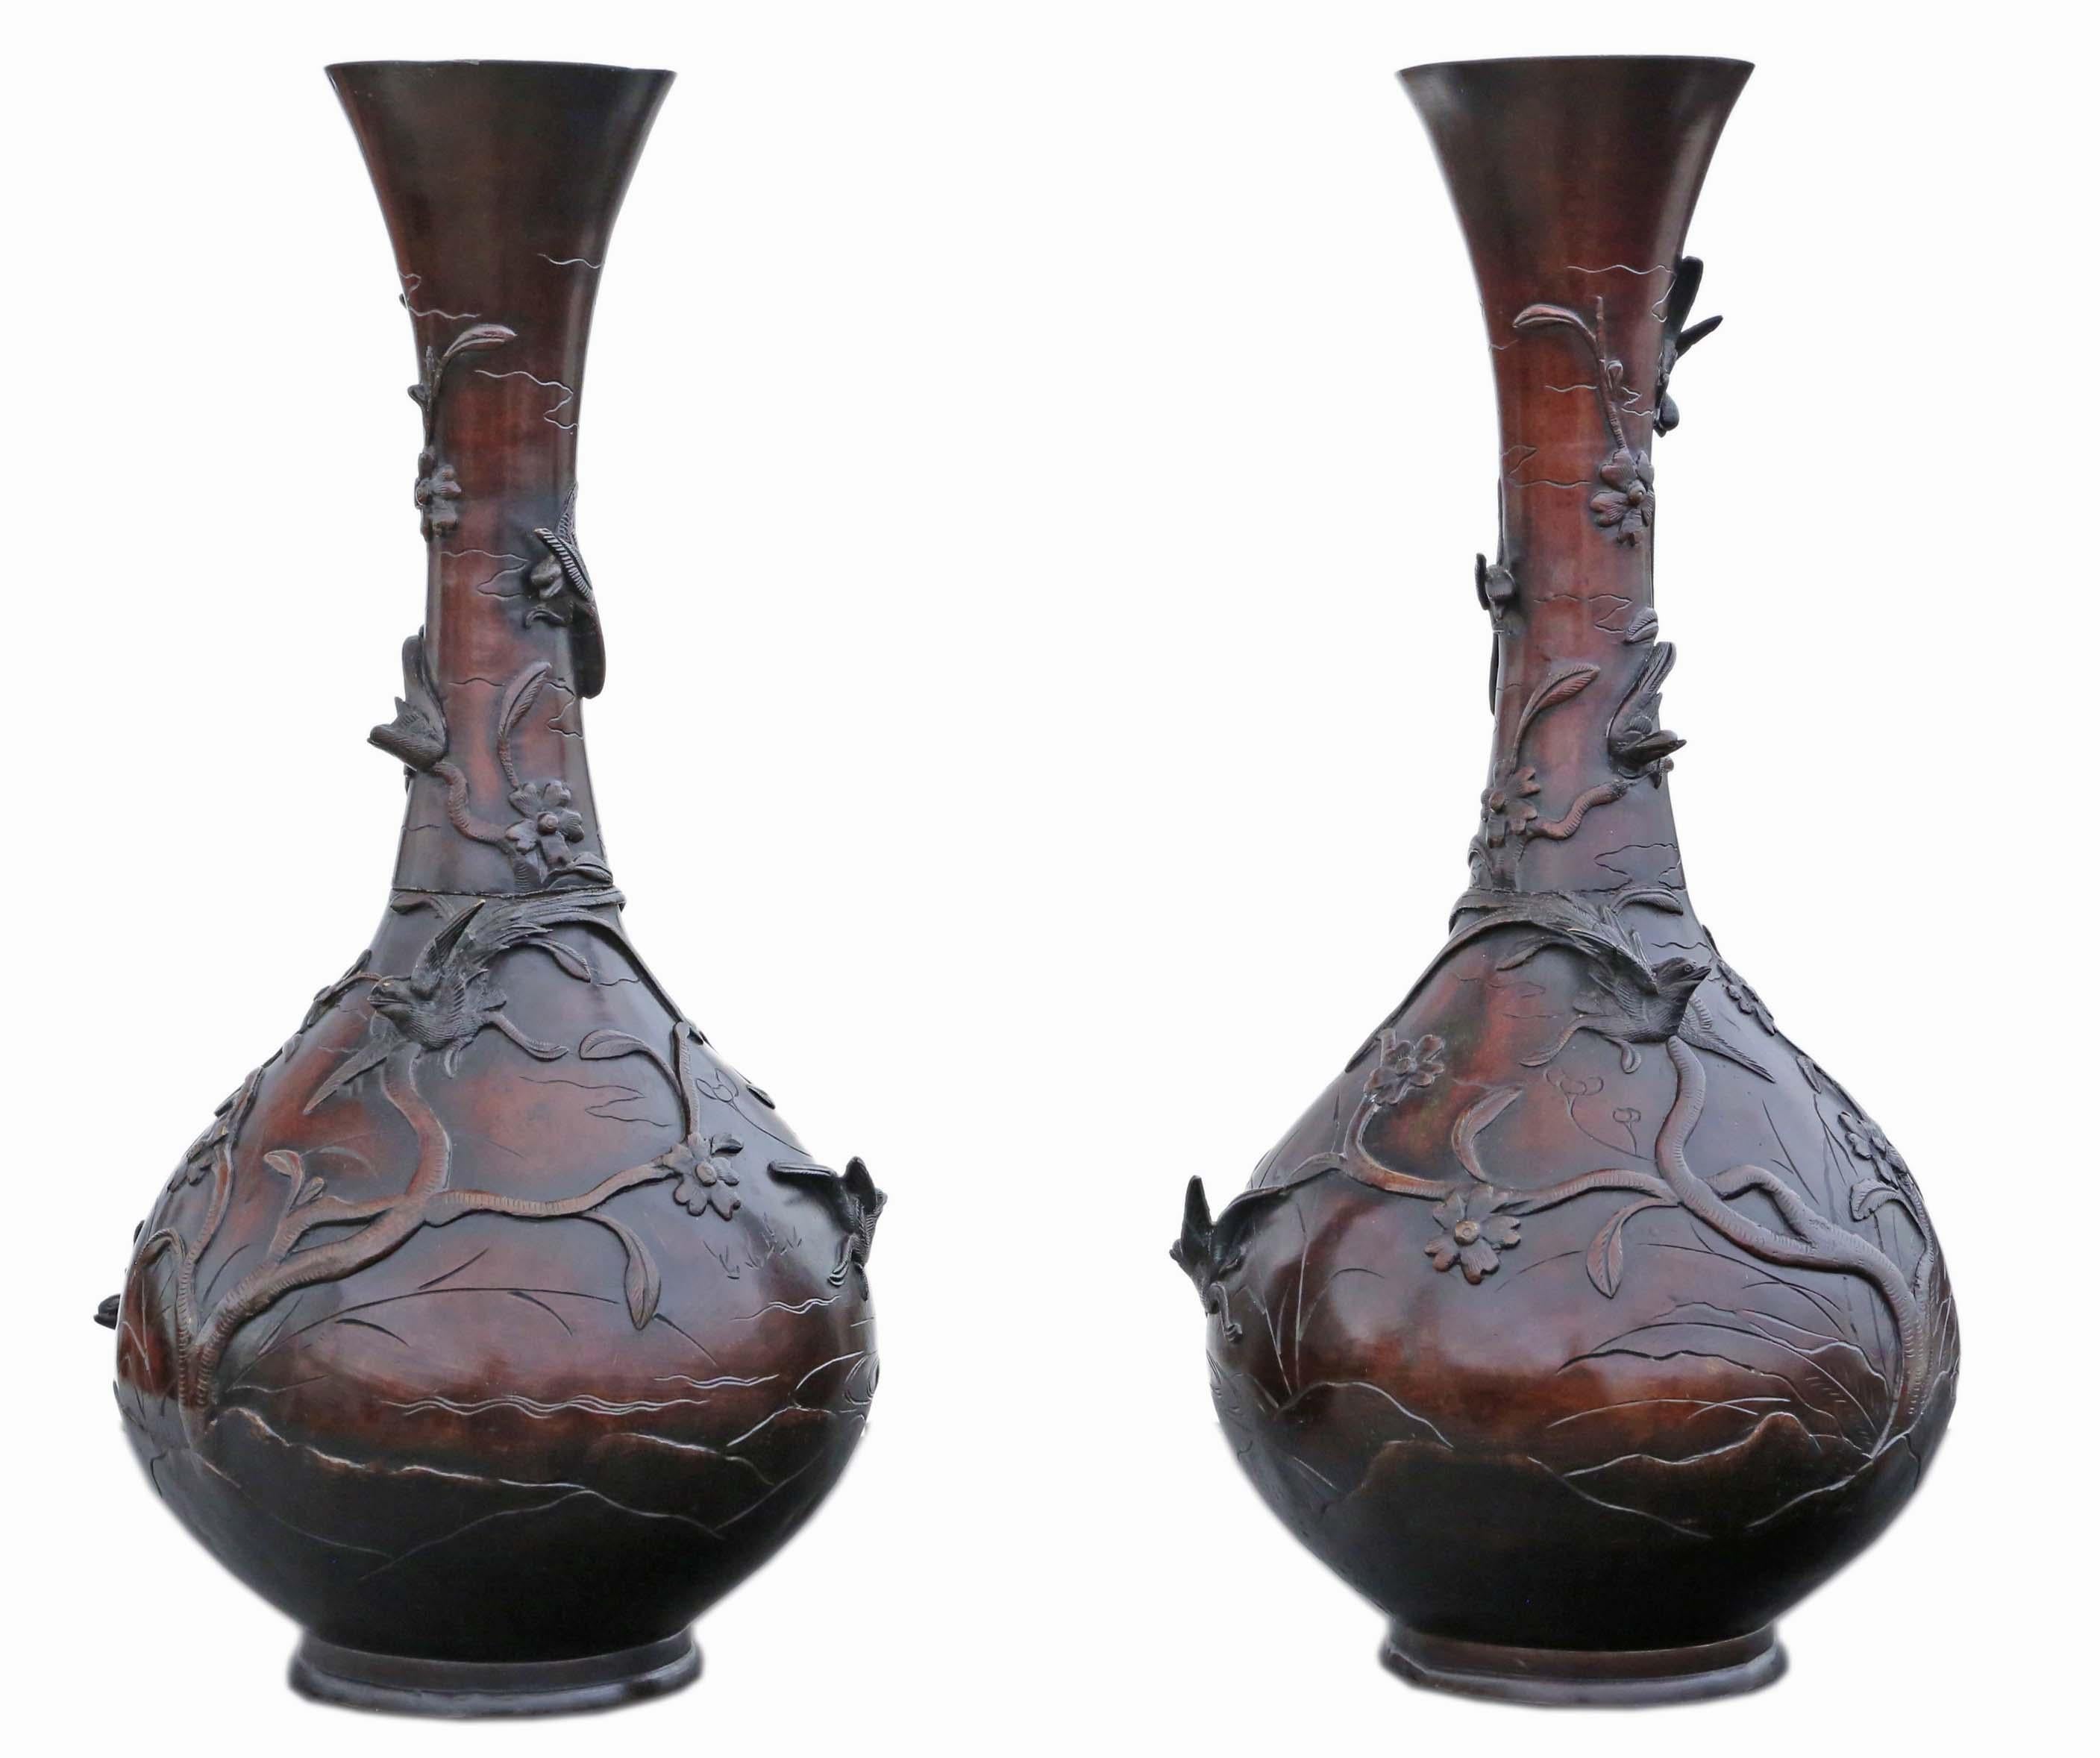 Antique Very Large Pair of Japanese Bronze Vases - Exquisite Meiji Period Artist Pieces!

These magnificent Japanese bronze vases, dating back to the 19th Century Meiji Period, showcase exceptional craftsmanship and artistry. Each vase bears the